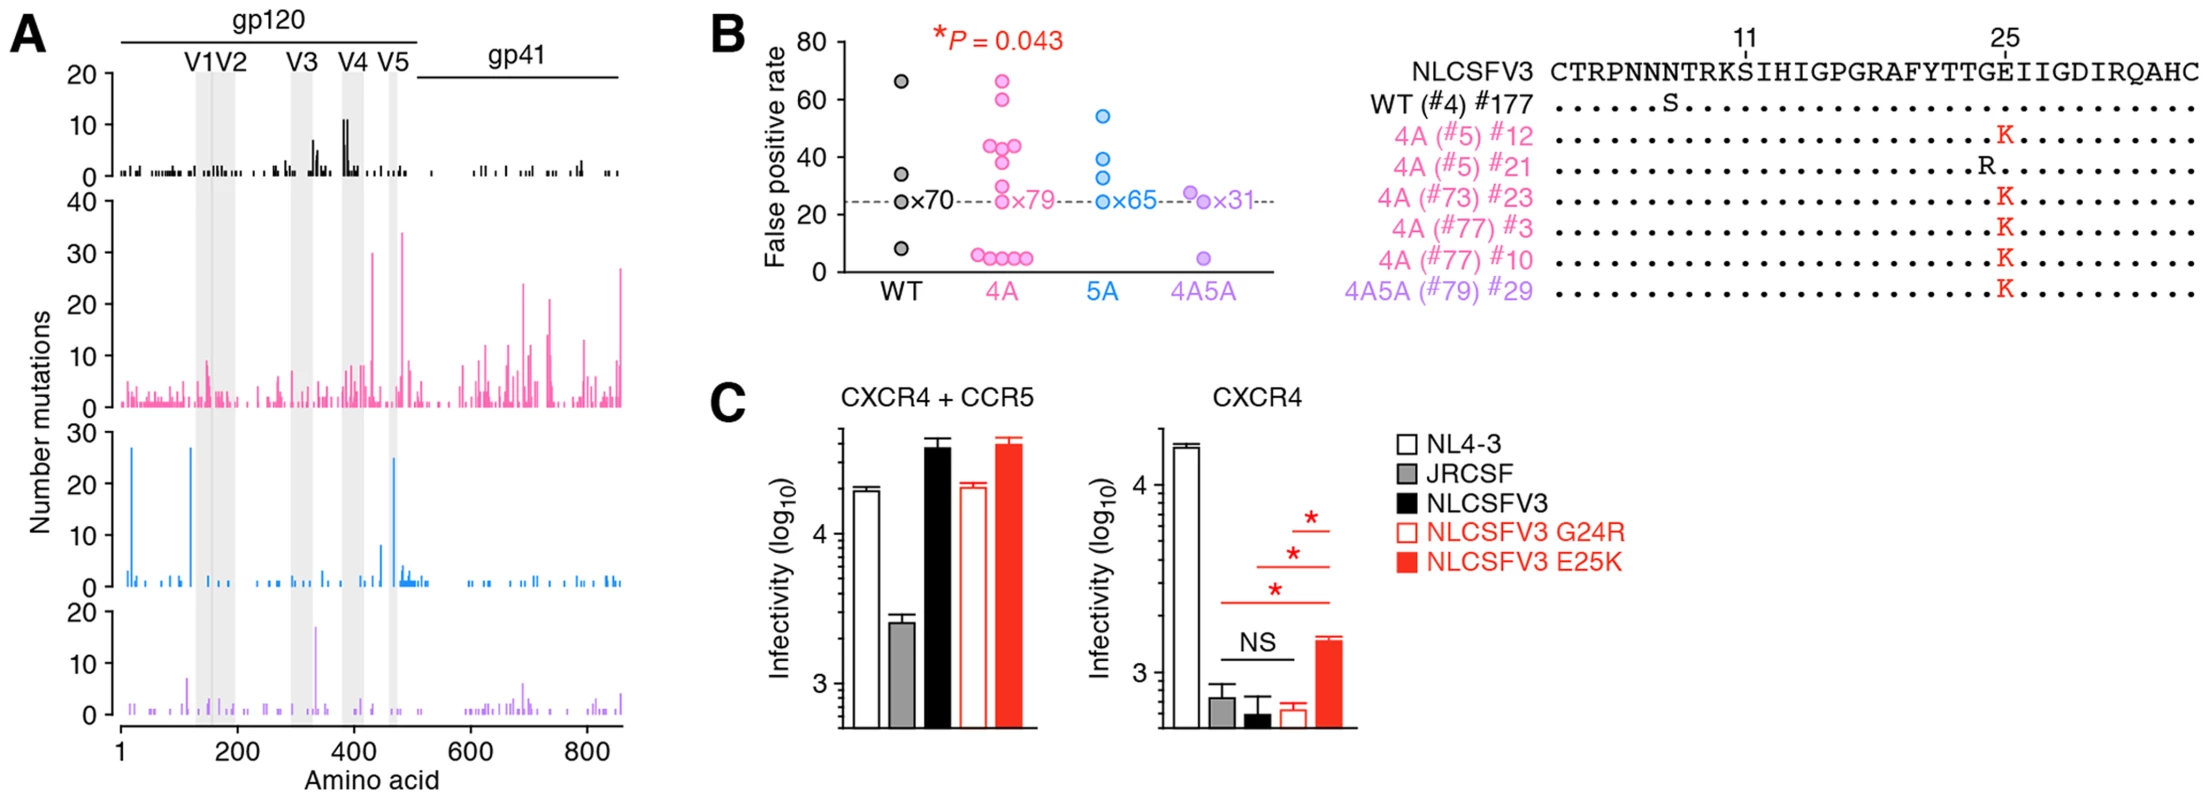 Functional evolution of 4A HIV-1 <i>in vivo</i>.